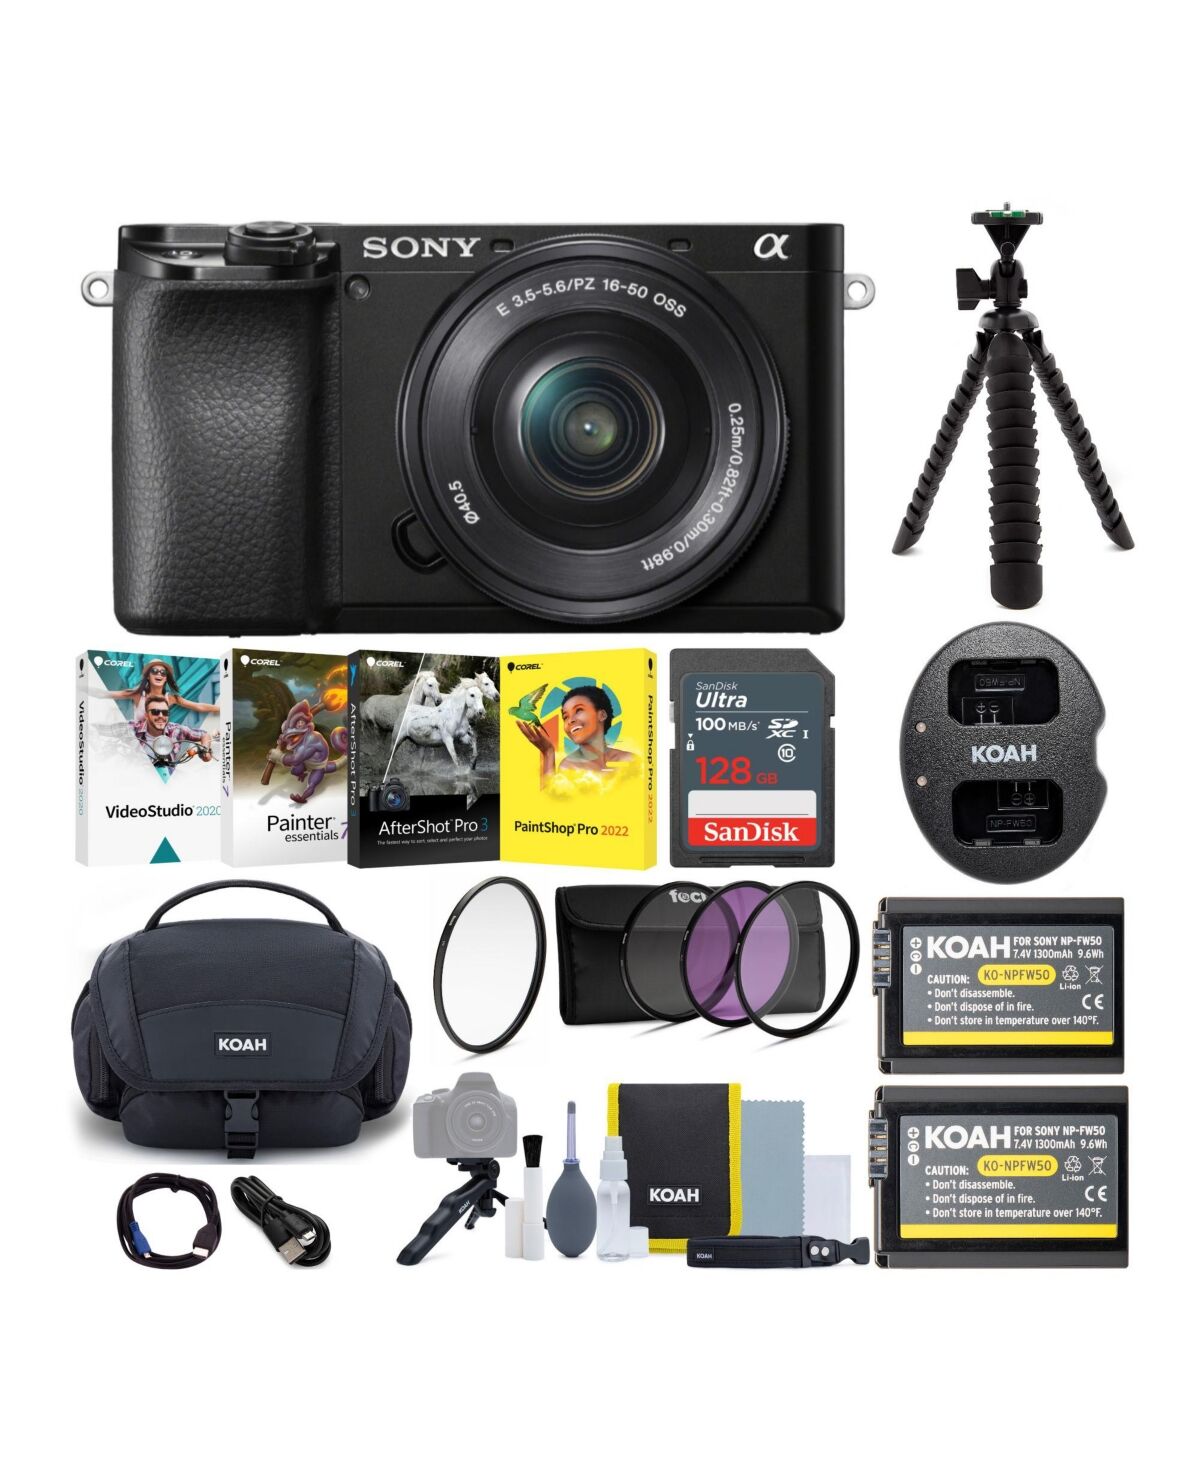 Sony Alpha a6100 Aps-c Mirror less Camera with 16-50mm Lens and Accessory Bundle - Black